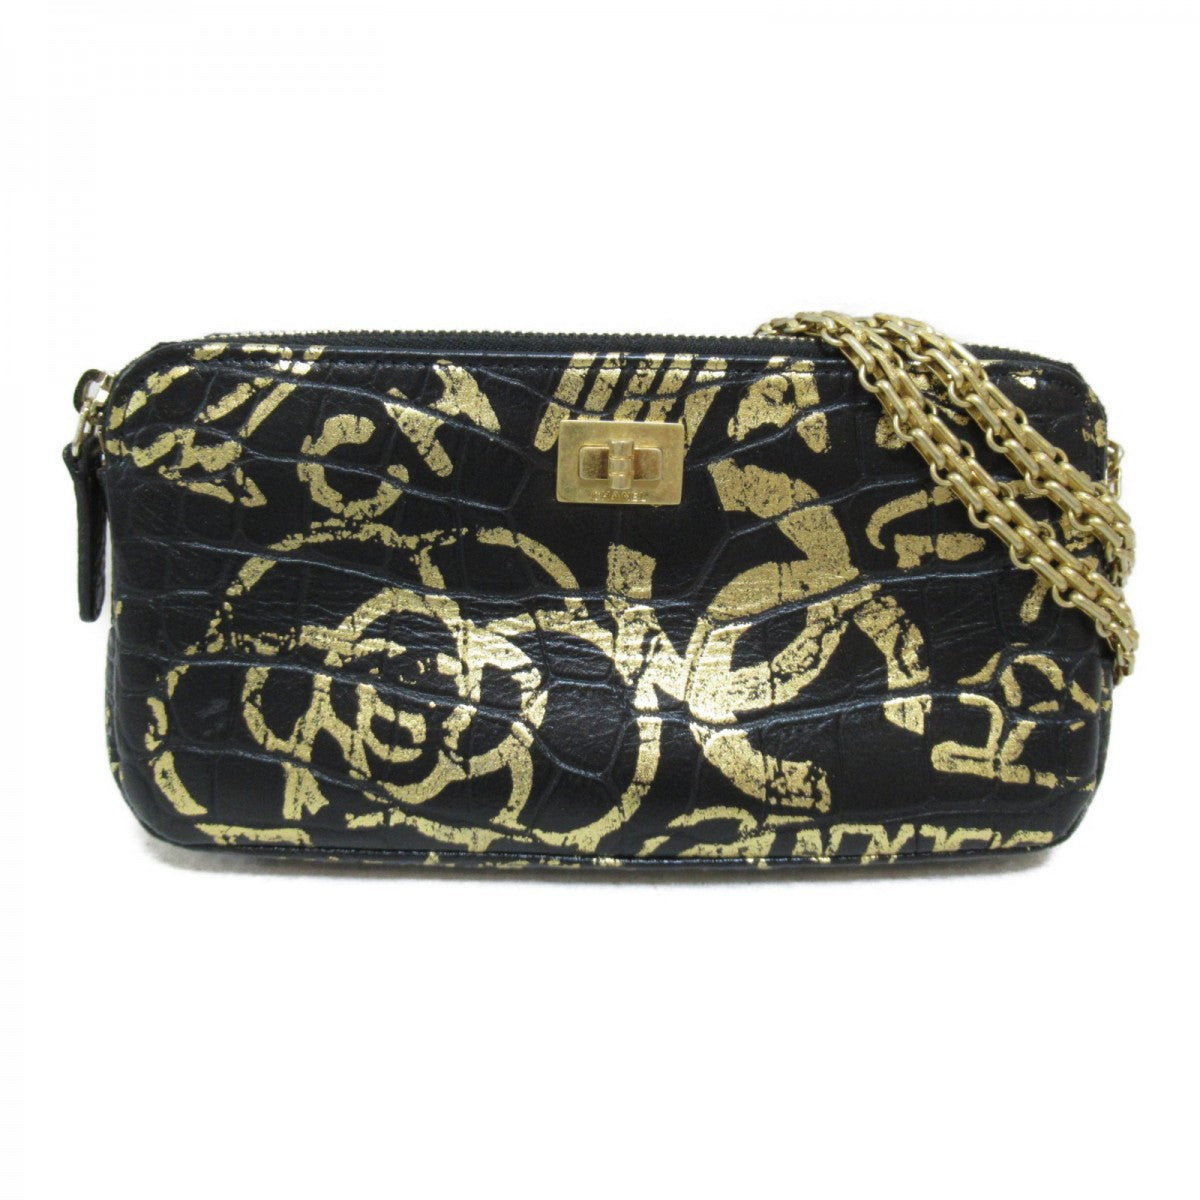 Reissue Croc Embossed Leather Clutch with Chain